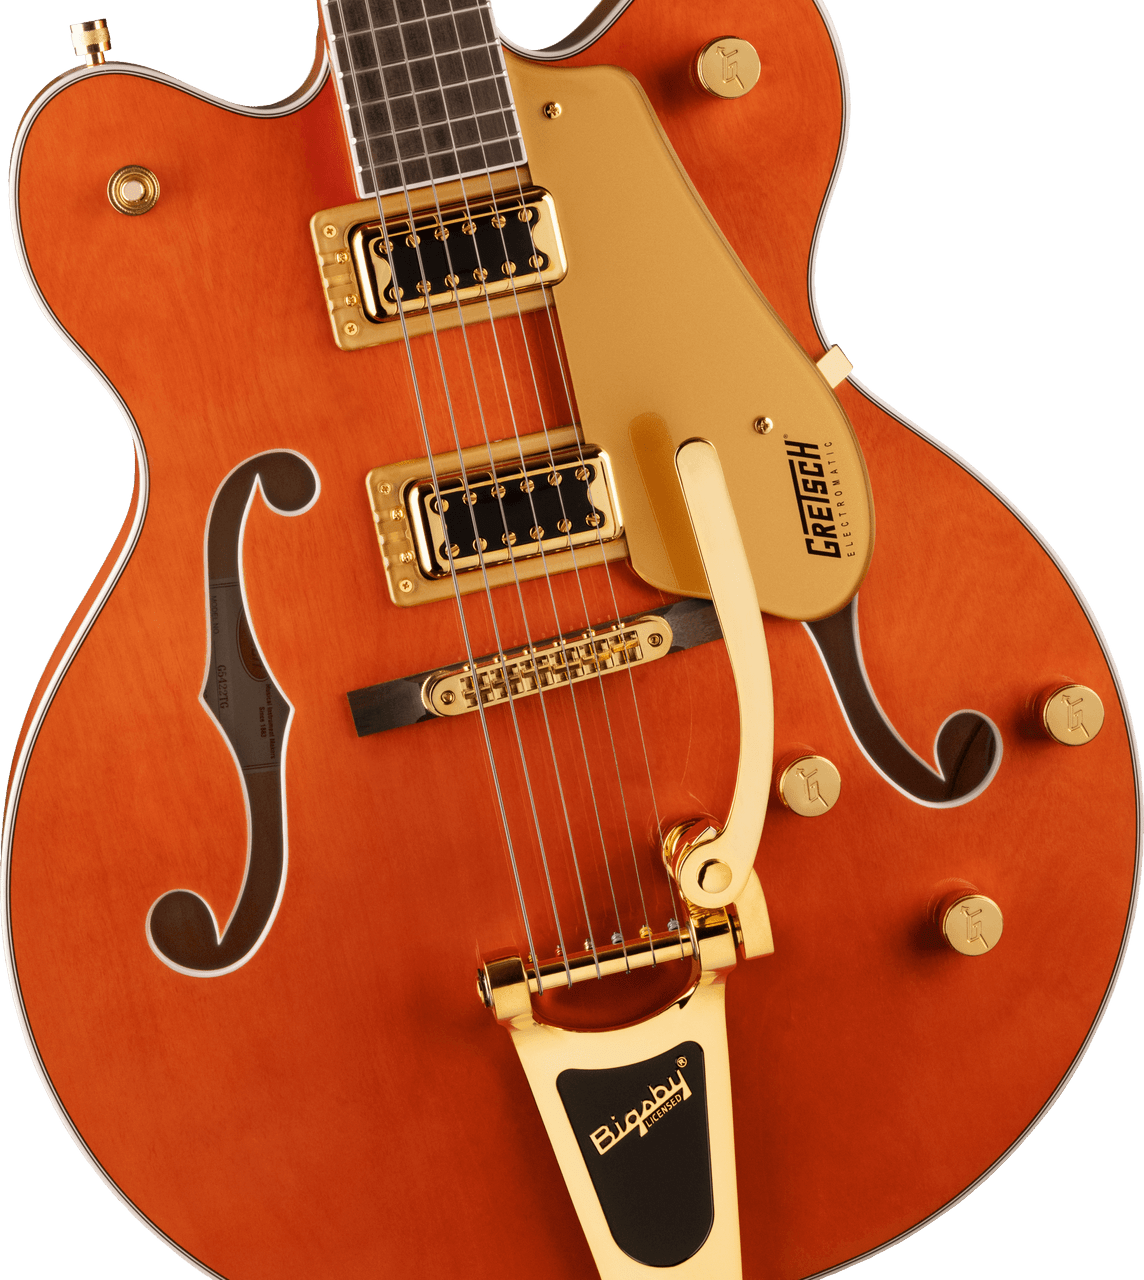 Gretsch Guitars G5422TG Electromatic Classic Hollowbody Double-Cut With  Bigsby and Gold Hardware Electric Guitar Snow Crest White